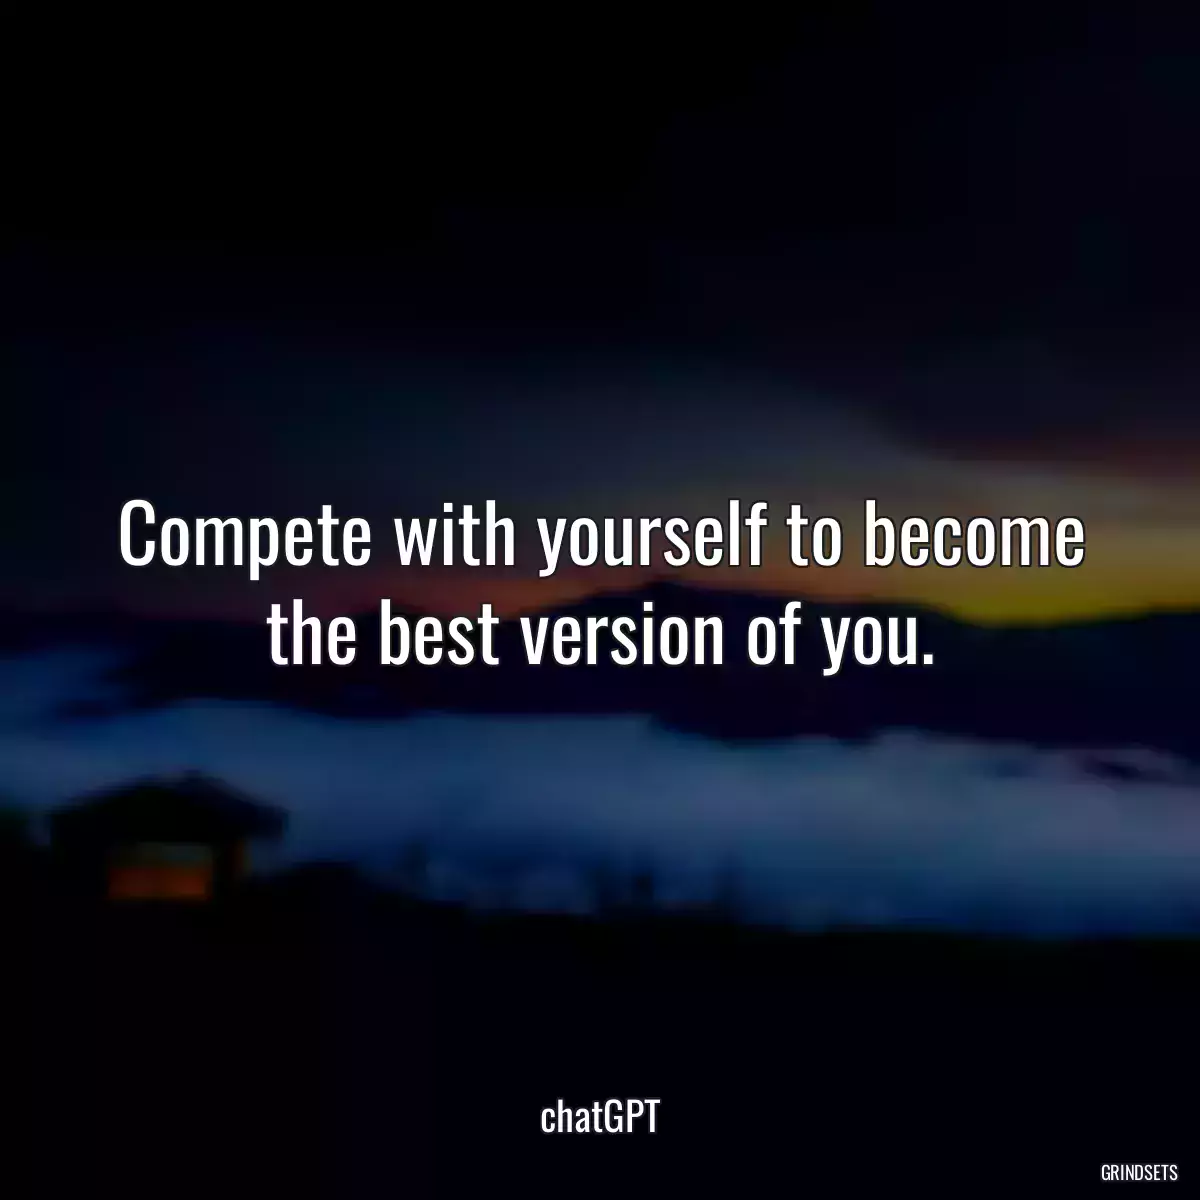 Compete with yourself to become the best version of you.